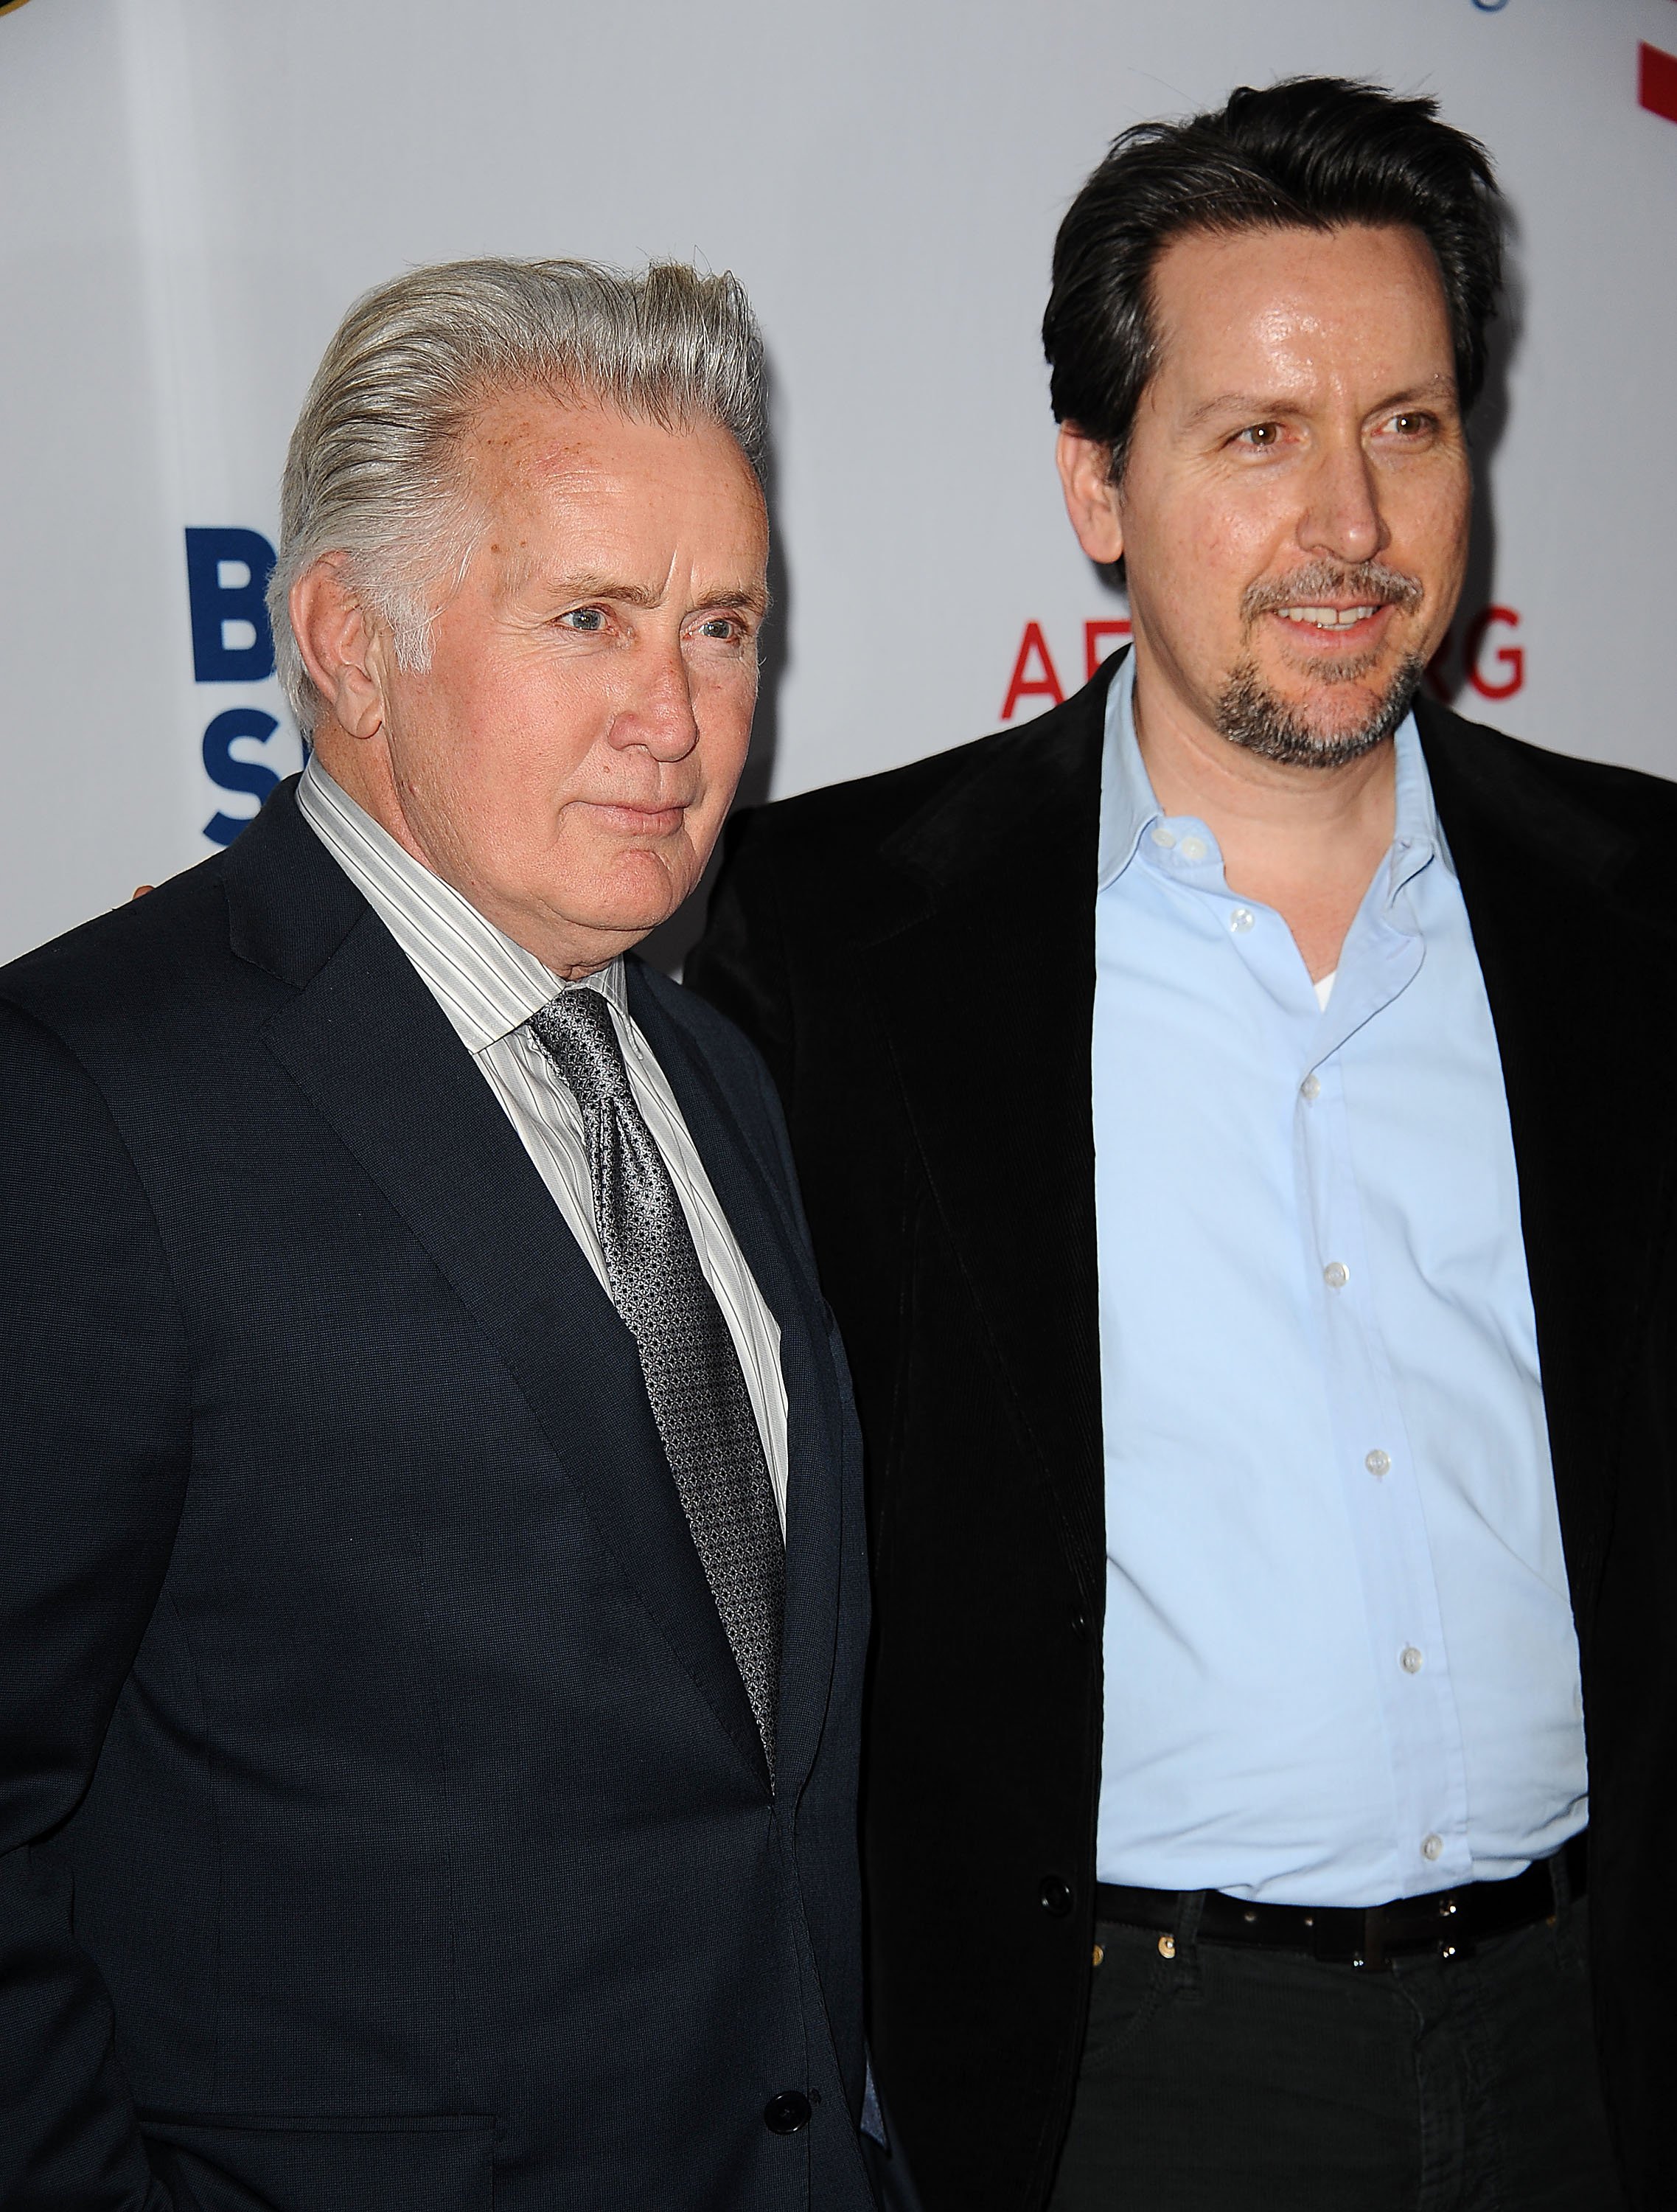 Actor Martin Sheen (L) and his son Ramon Estevez attend the West Coast premiere of "8" on March 3, 2012 in Los Angeles, California.  |  Source: Getty Images